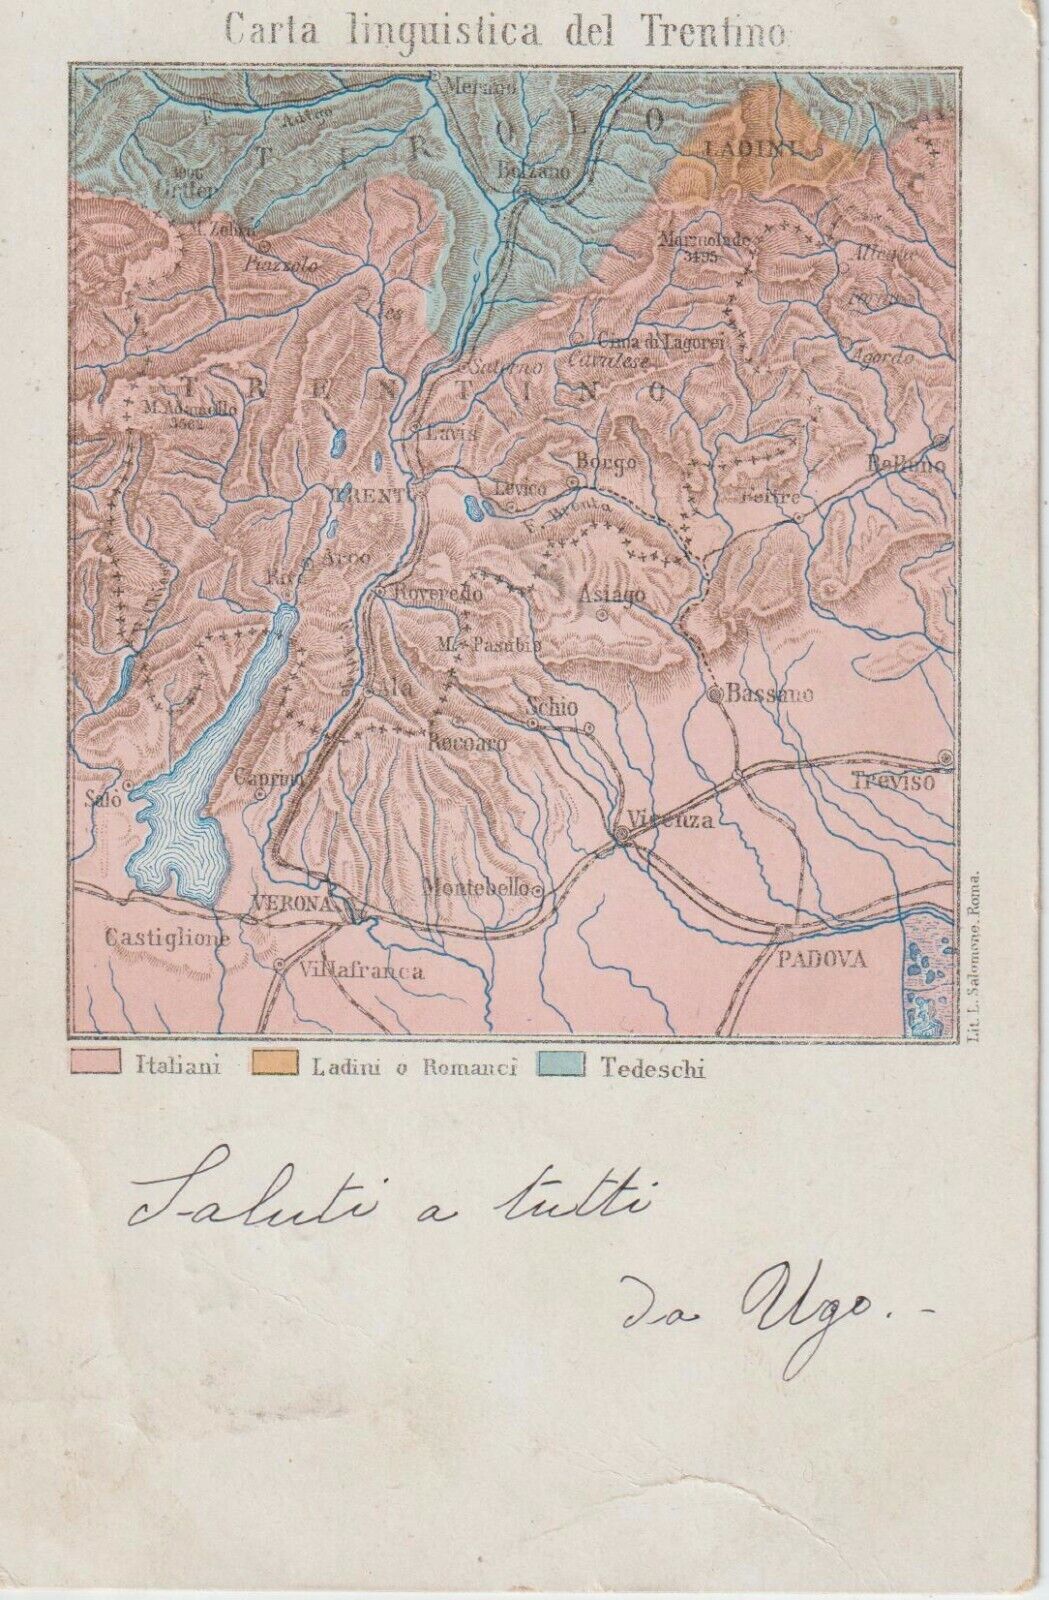 ITALY 1902 LINGUISTIC CHARTER OF TRENTINO